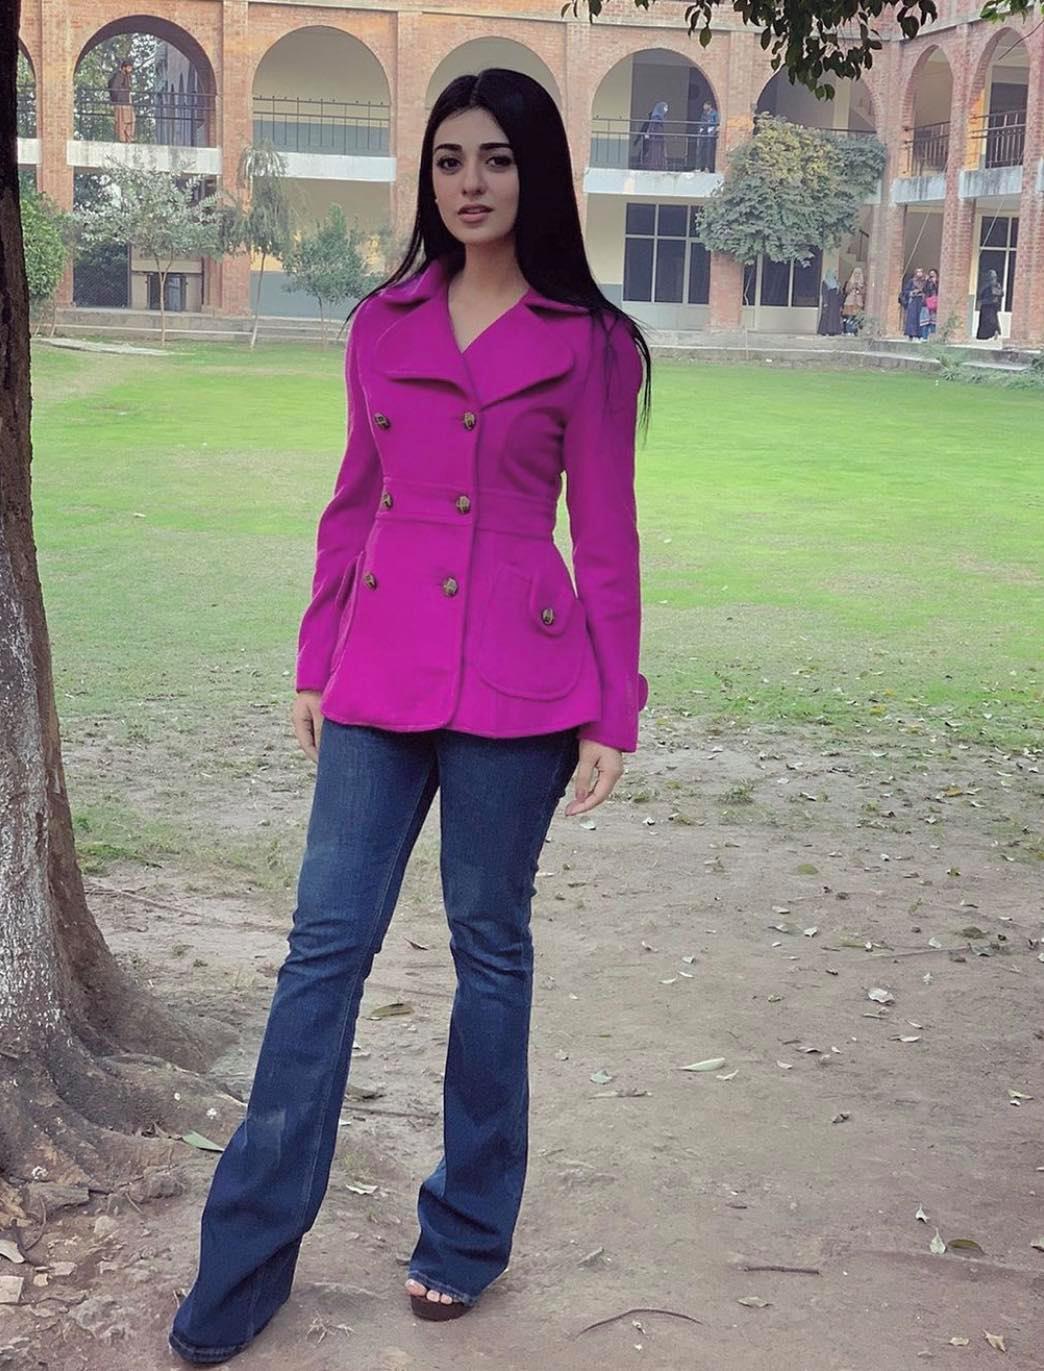 Pakistani Actresses Who Don’t Look Good In Western Outfits